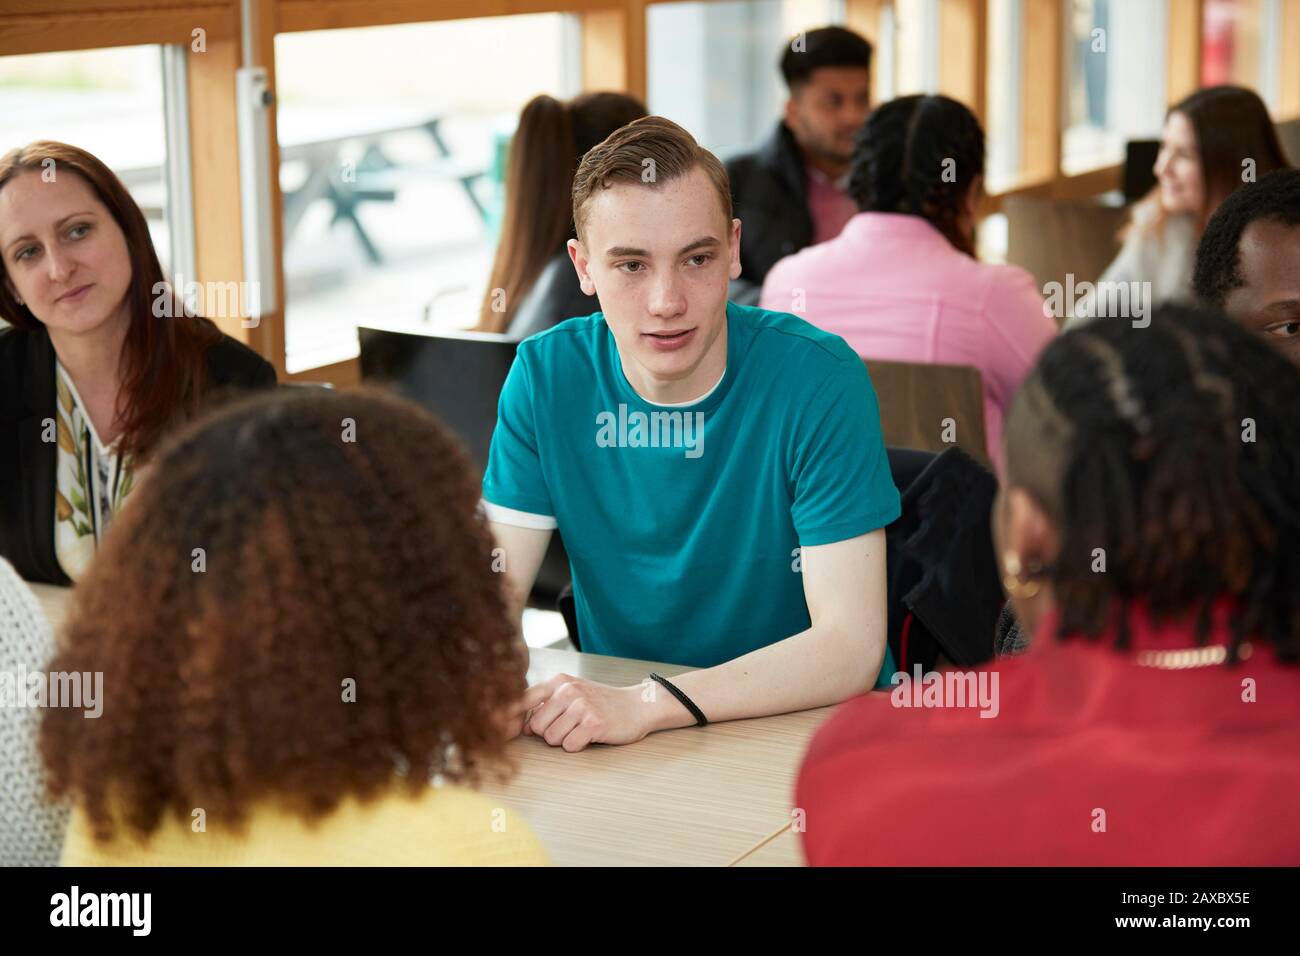 College students talking in classroom Stock Photo